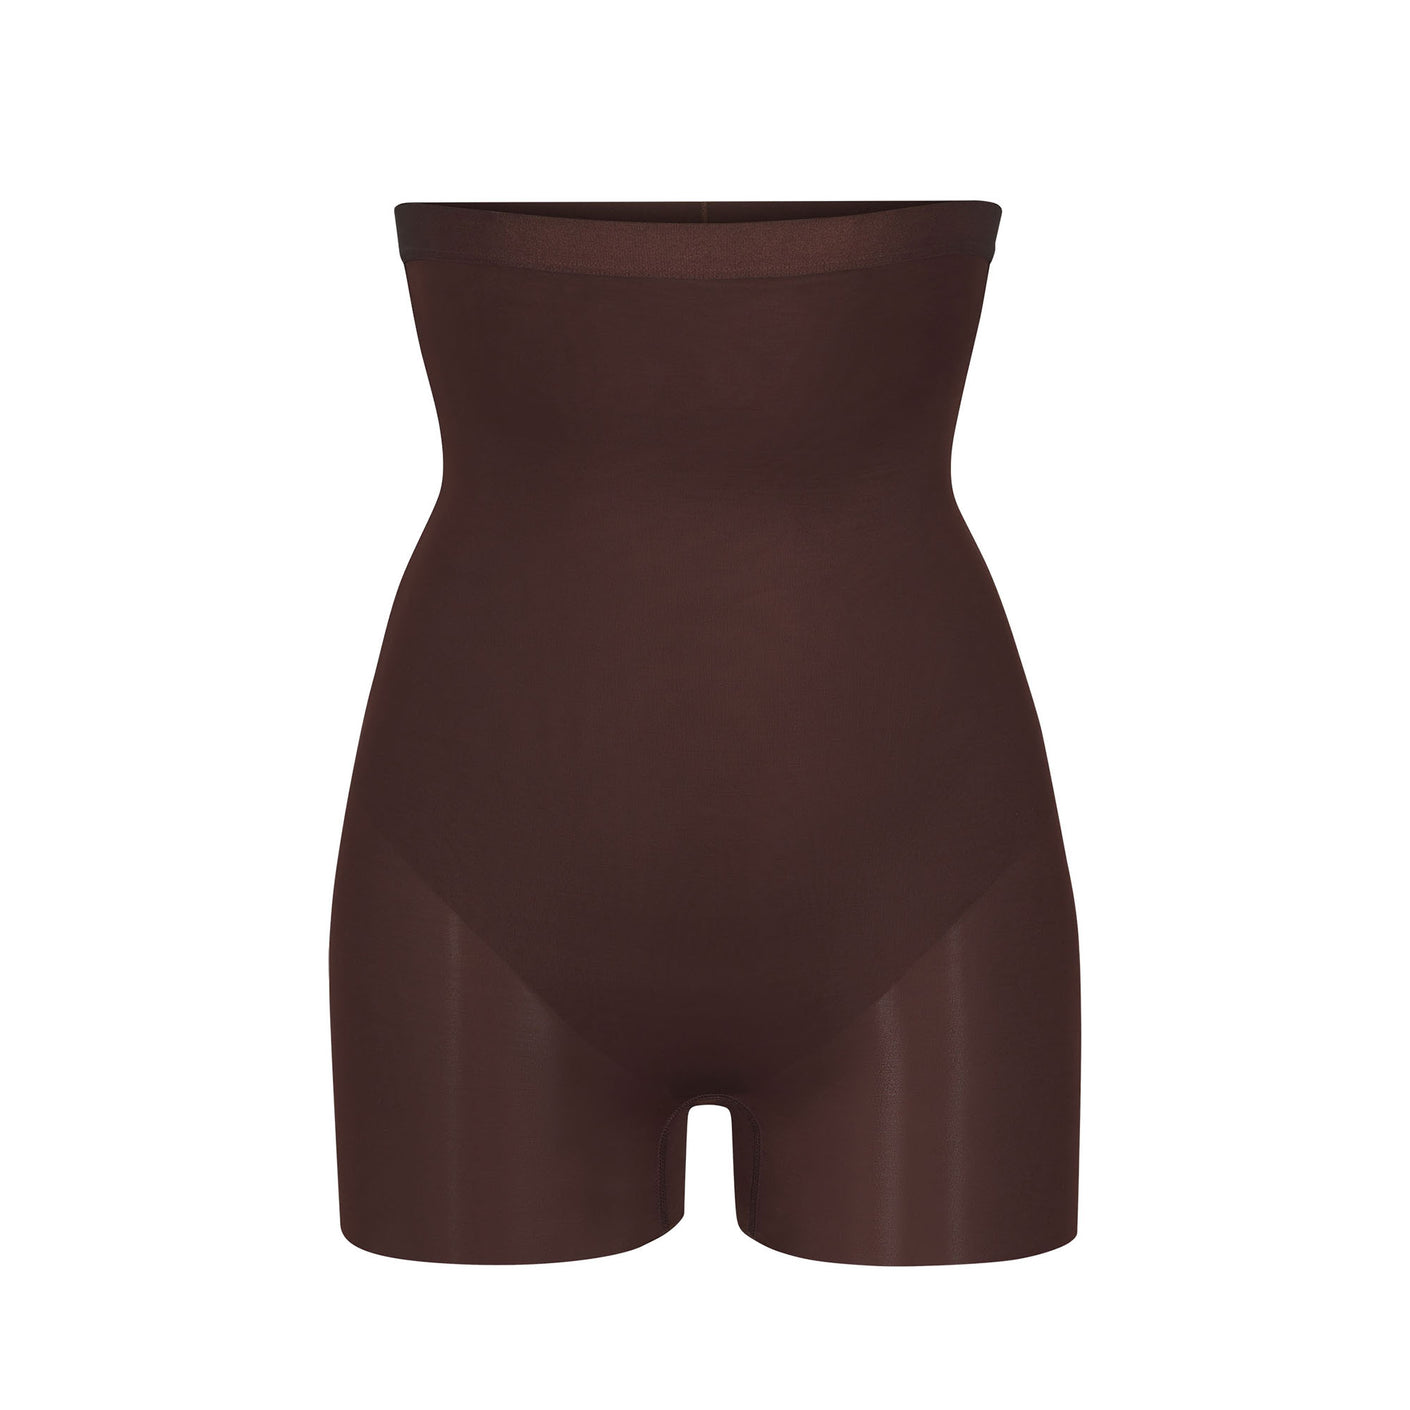 Extra high waist shorts  Shapes and controls abdomen, hips, legs and  buttocks with low compression